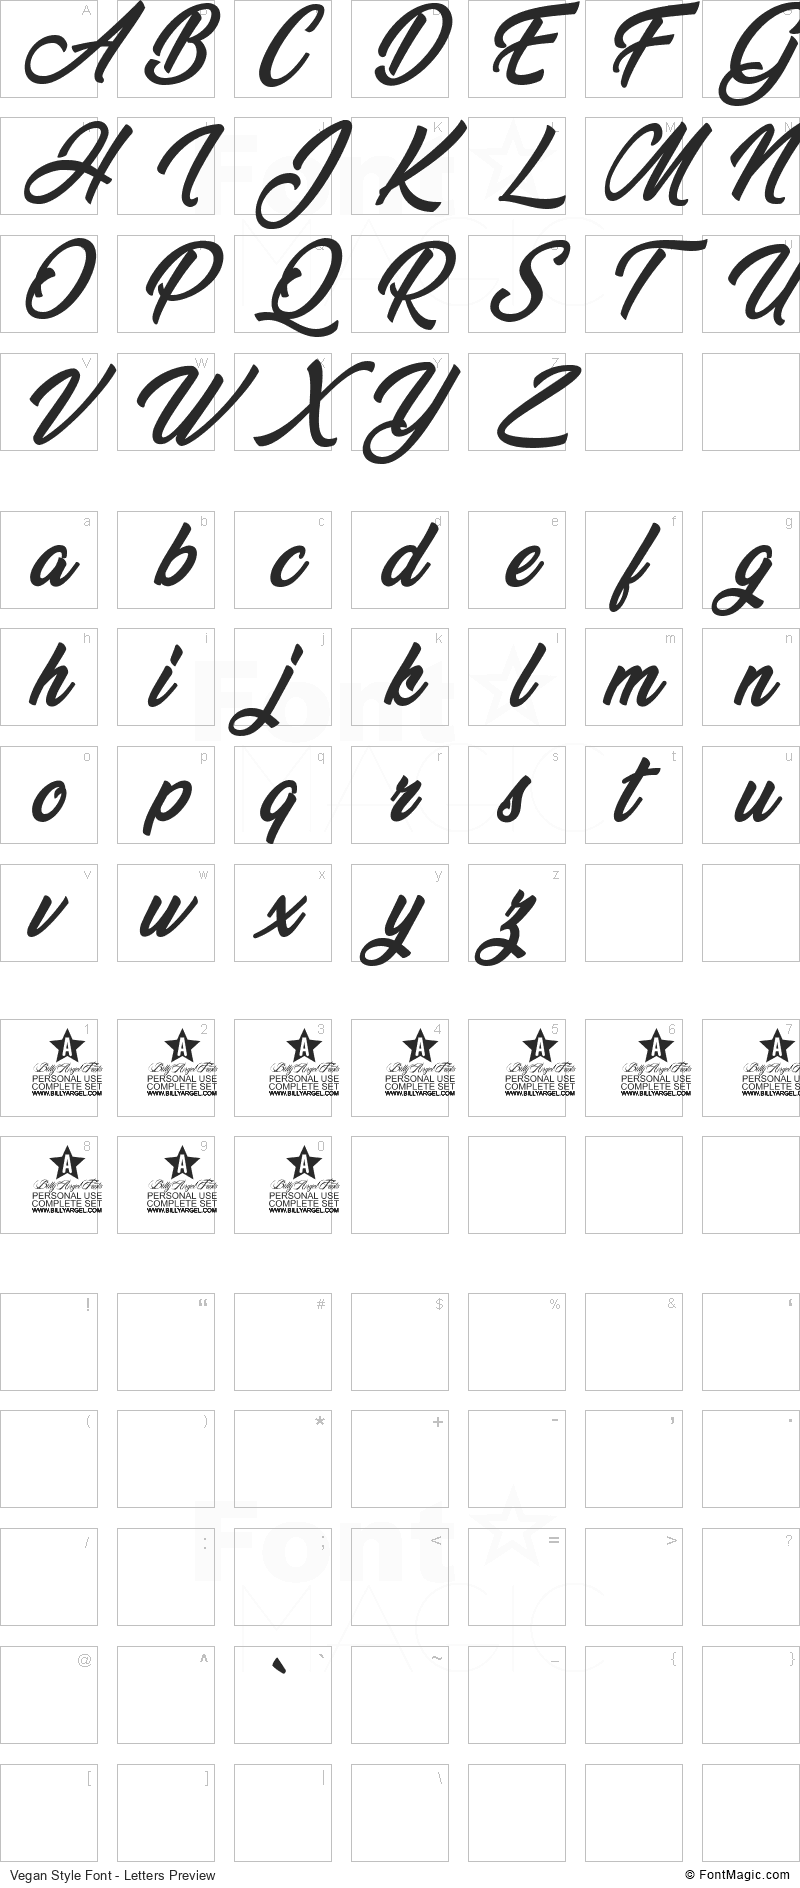 Vegan Style Font - All Latters Preview Chart